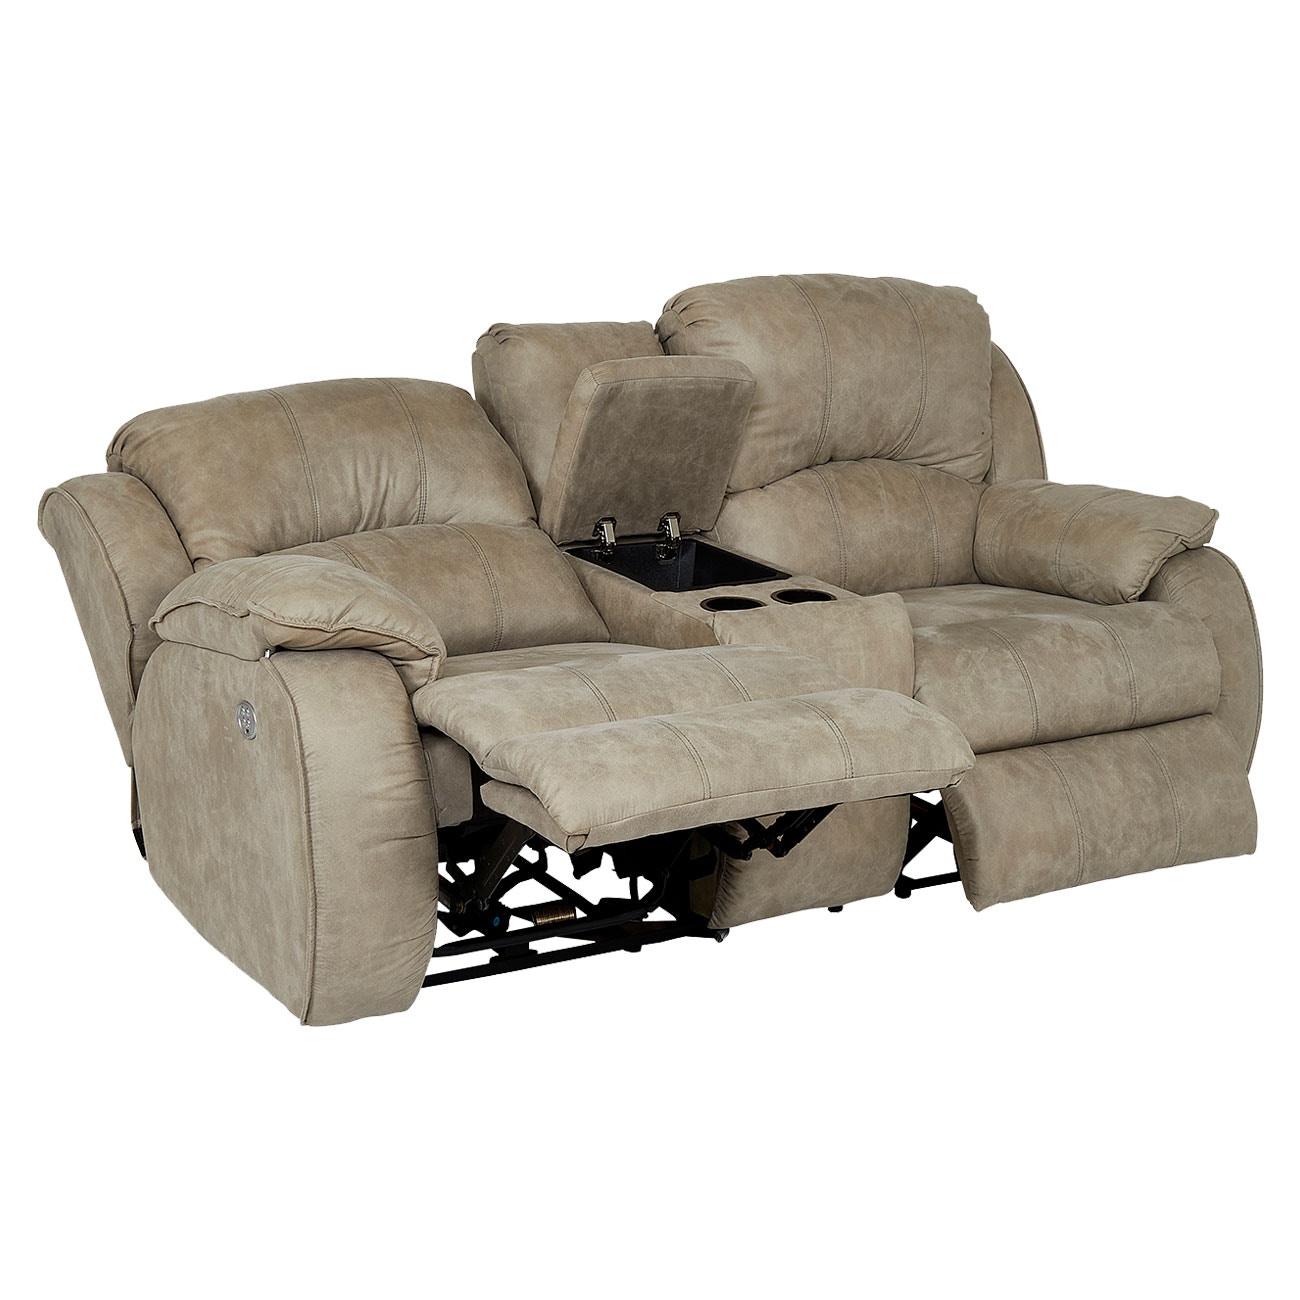 Southern Motion River Run Nickel Power Console Loveseat 705-78